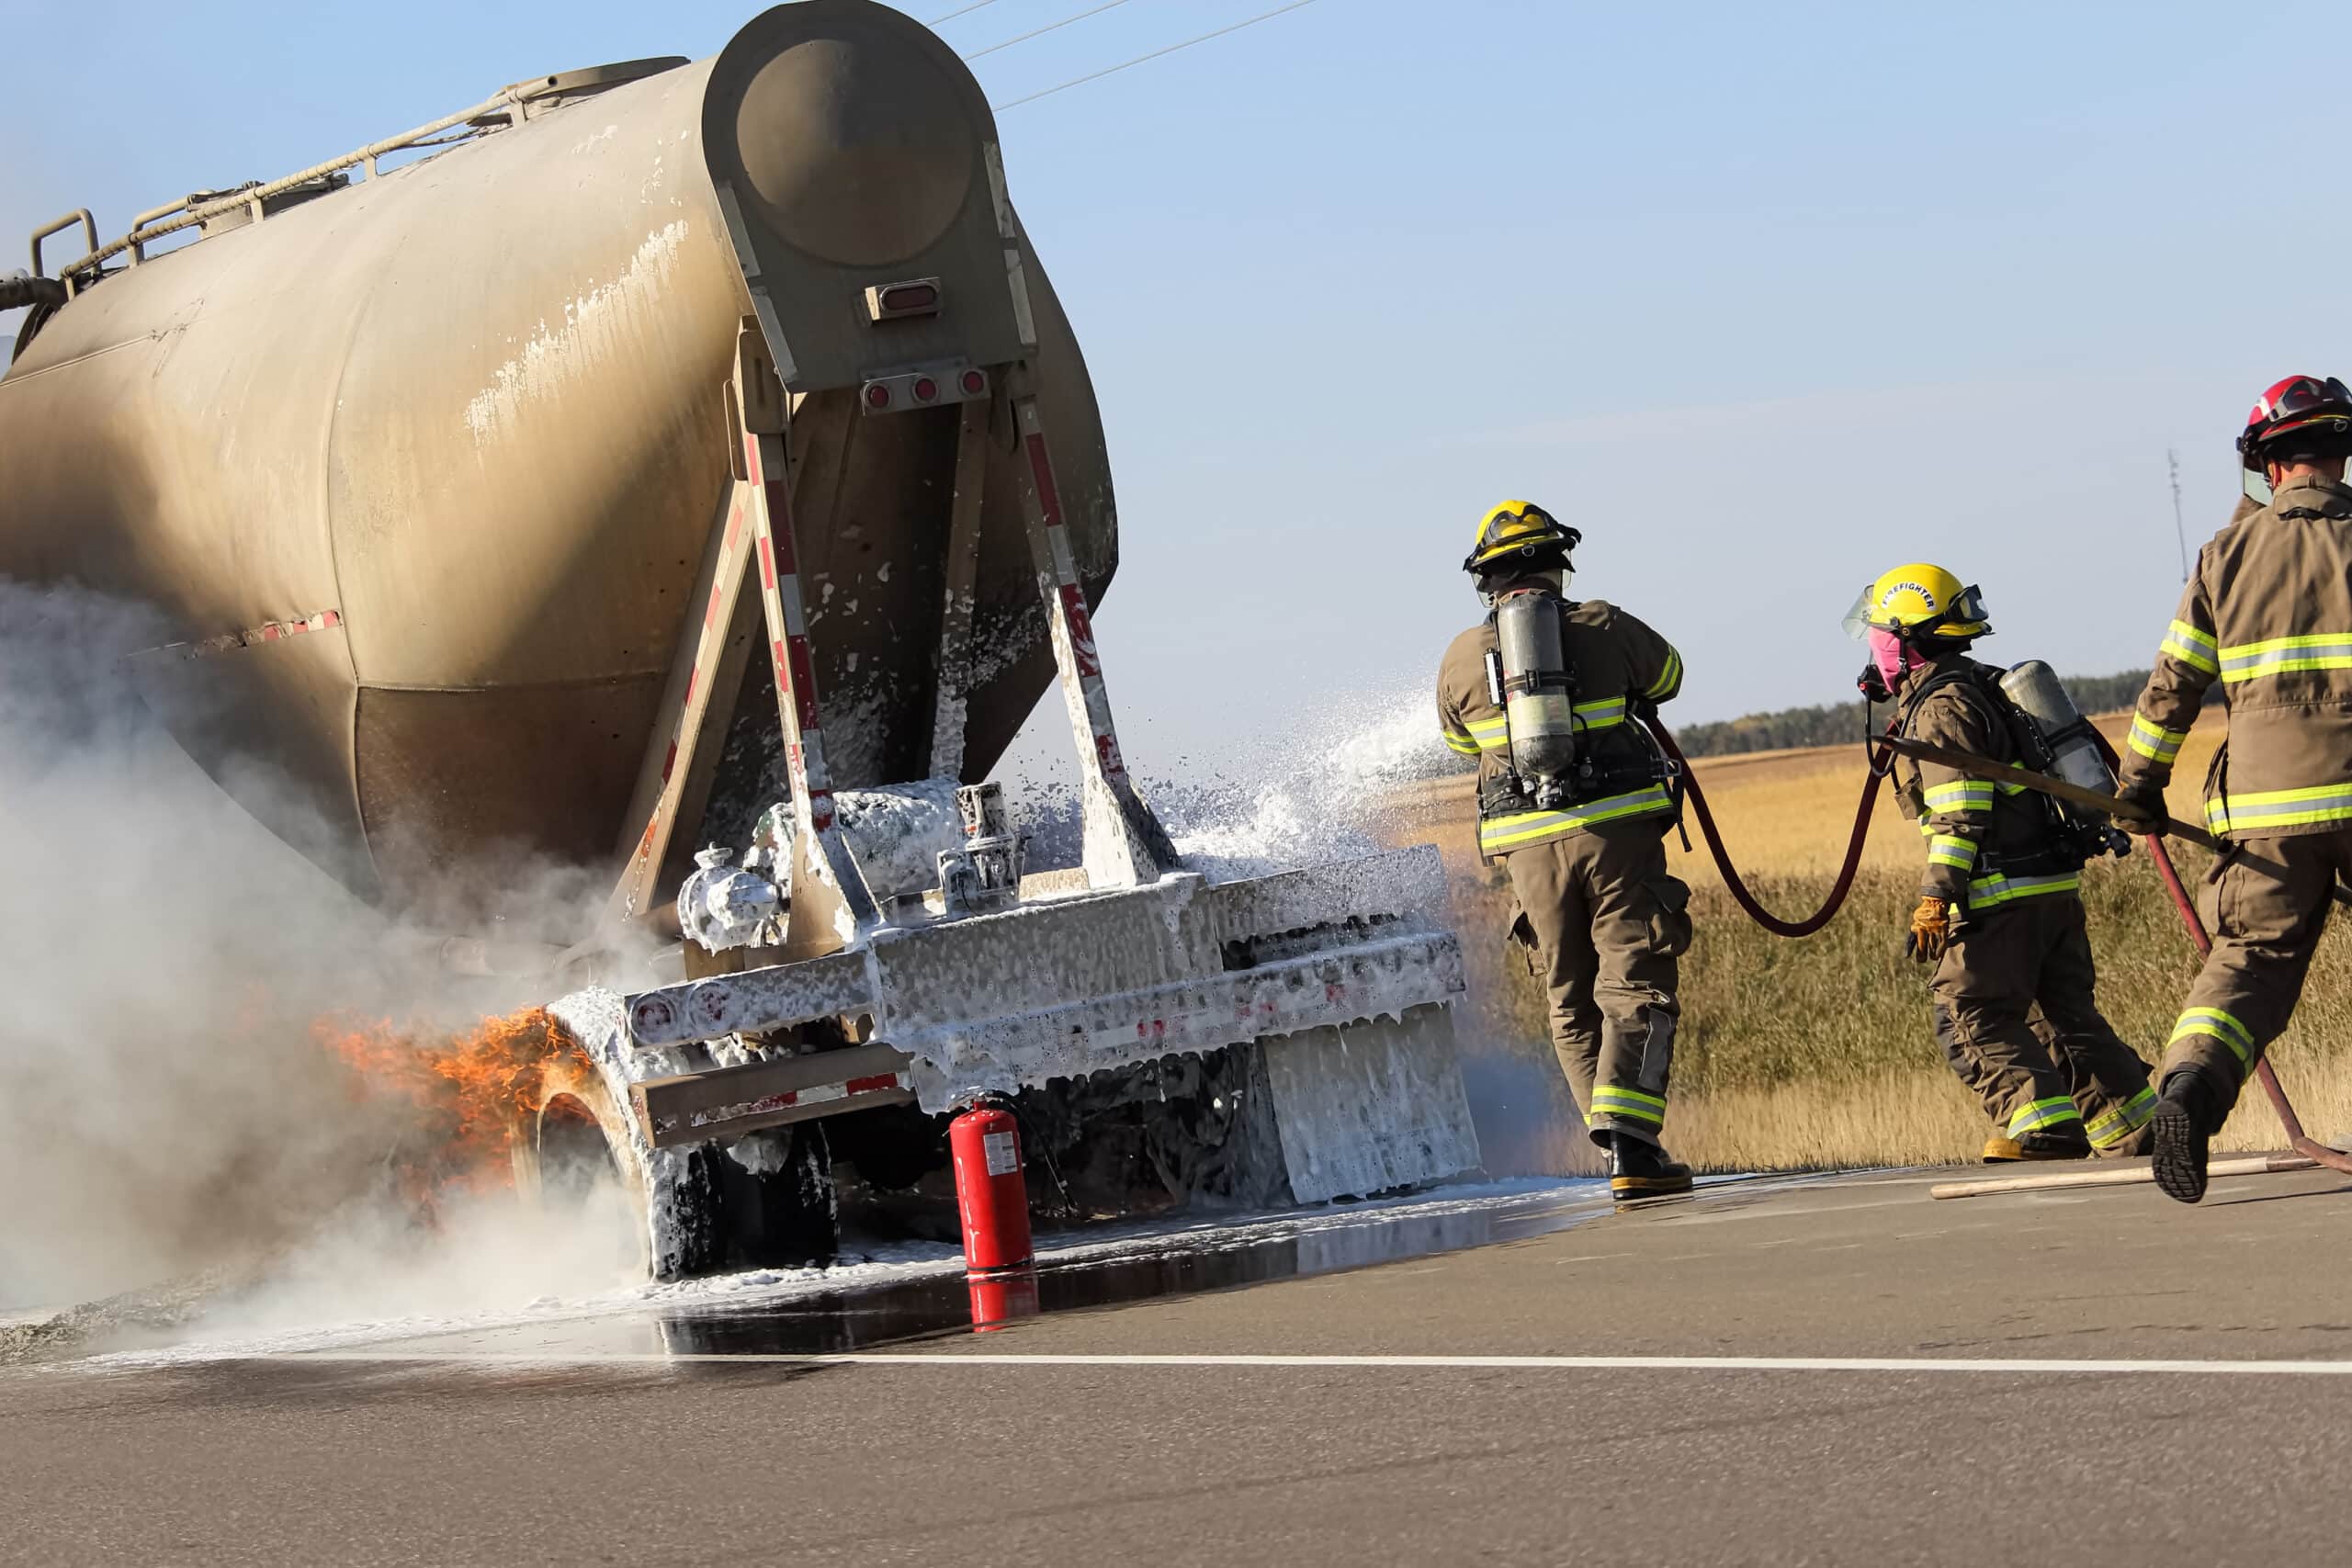 Three fireman rush to put out a brake fire on a semi-truck